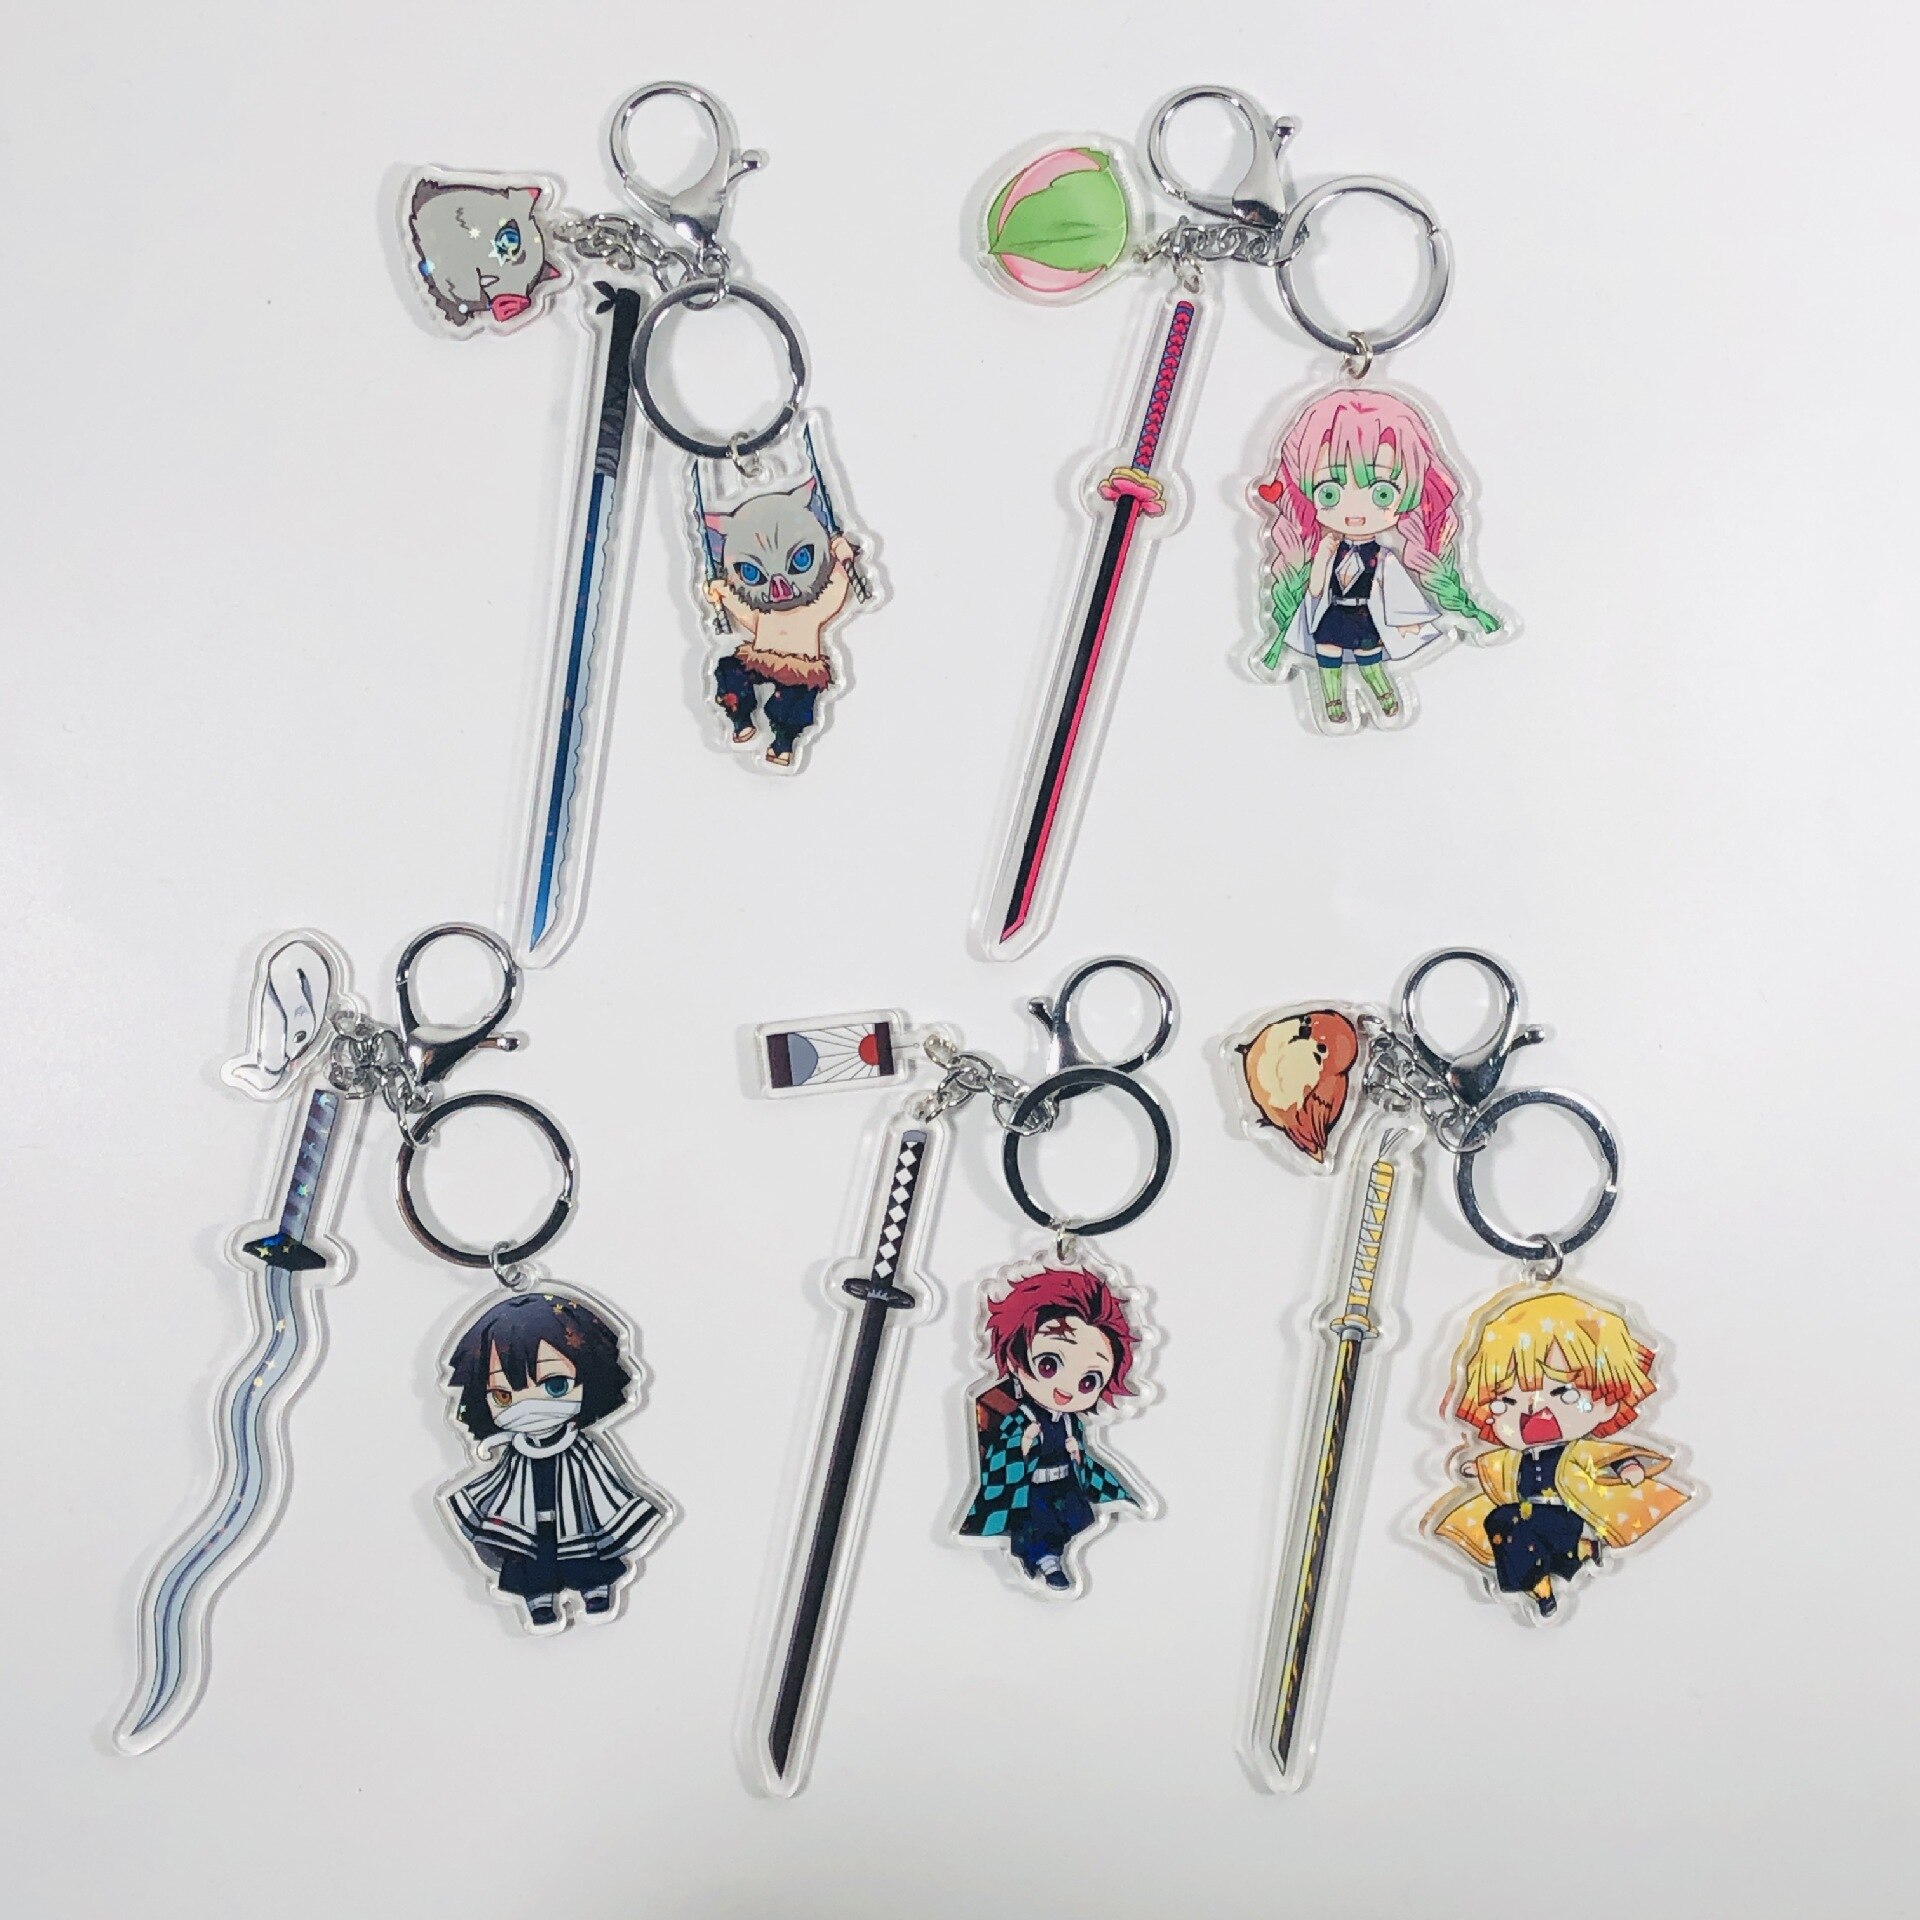 Demon Slayer – Different Characters Themed Keychains with Swords (20+ Designs) Keychains